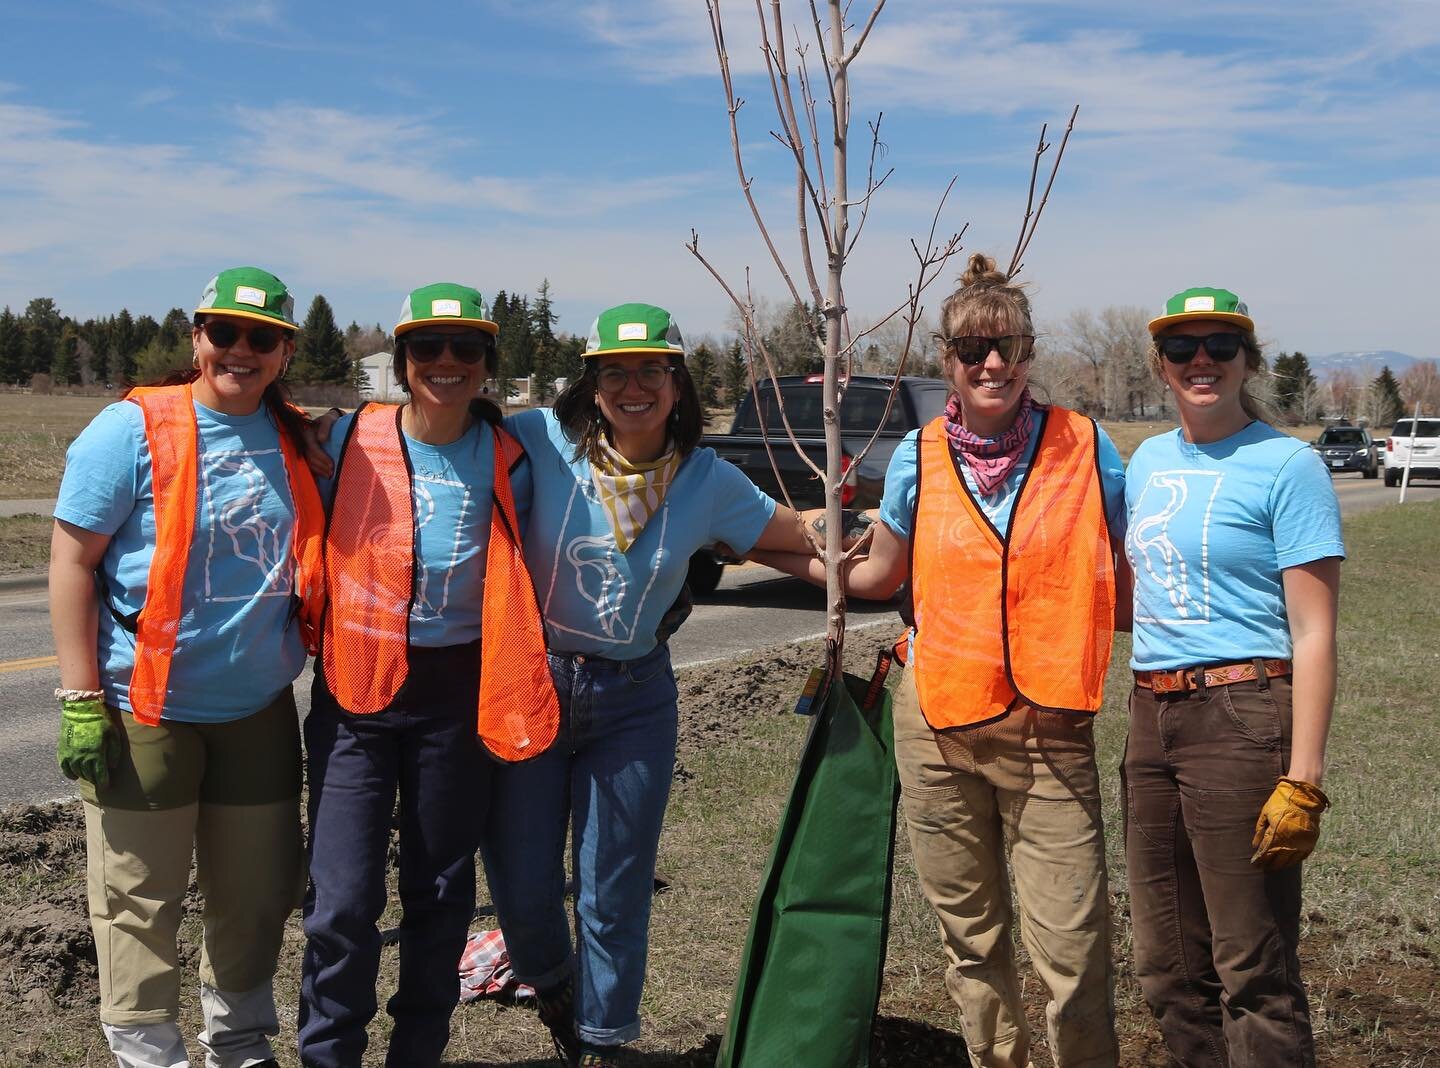 Join our team!  At the Gallatin Watershed Council, we are dedicated to guiding collaborative watershed stewardship in the Gallatin Valley for a healthy and productive landscape. We are looking to bring on two new members to our team, including a full